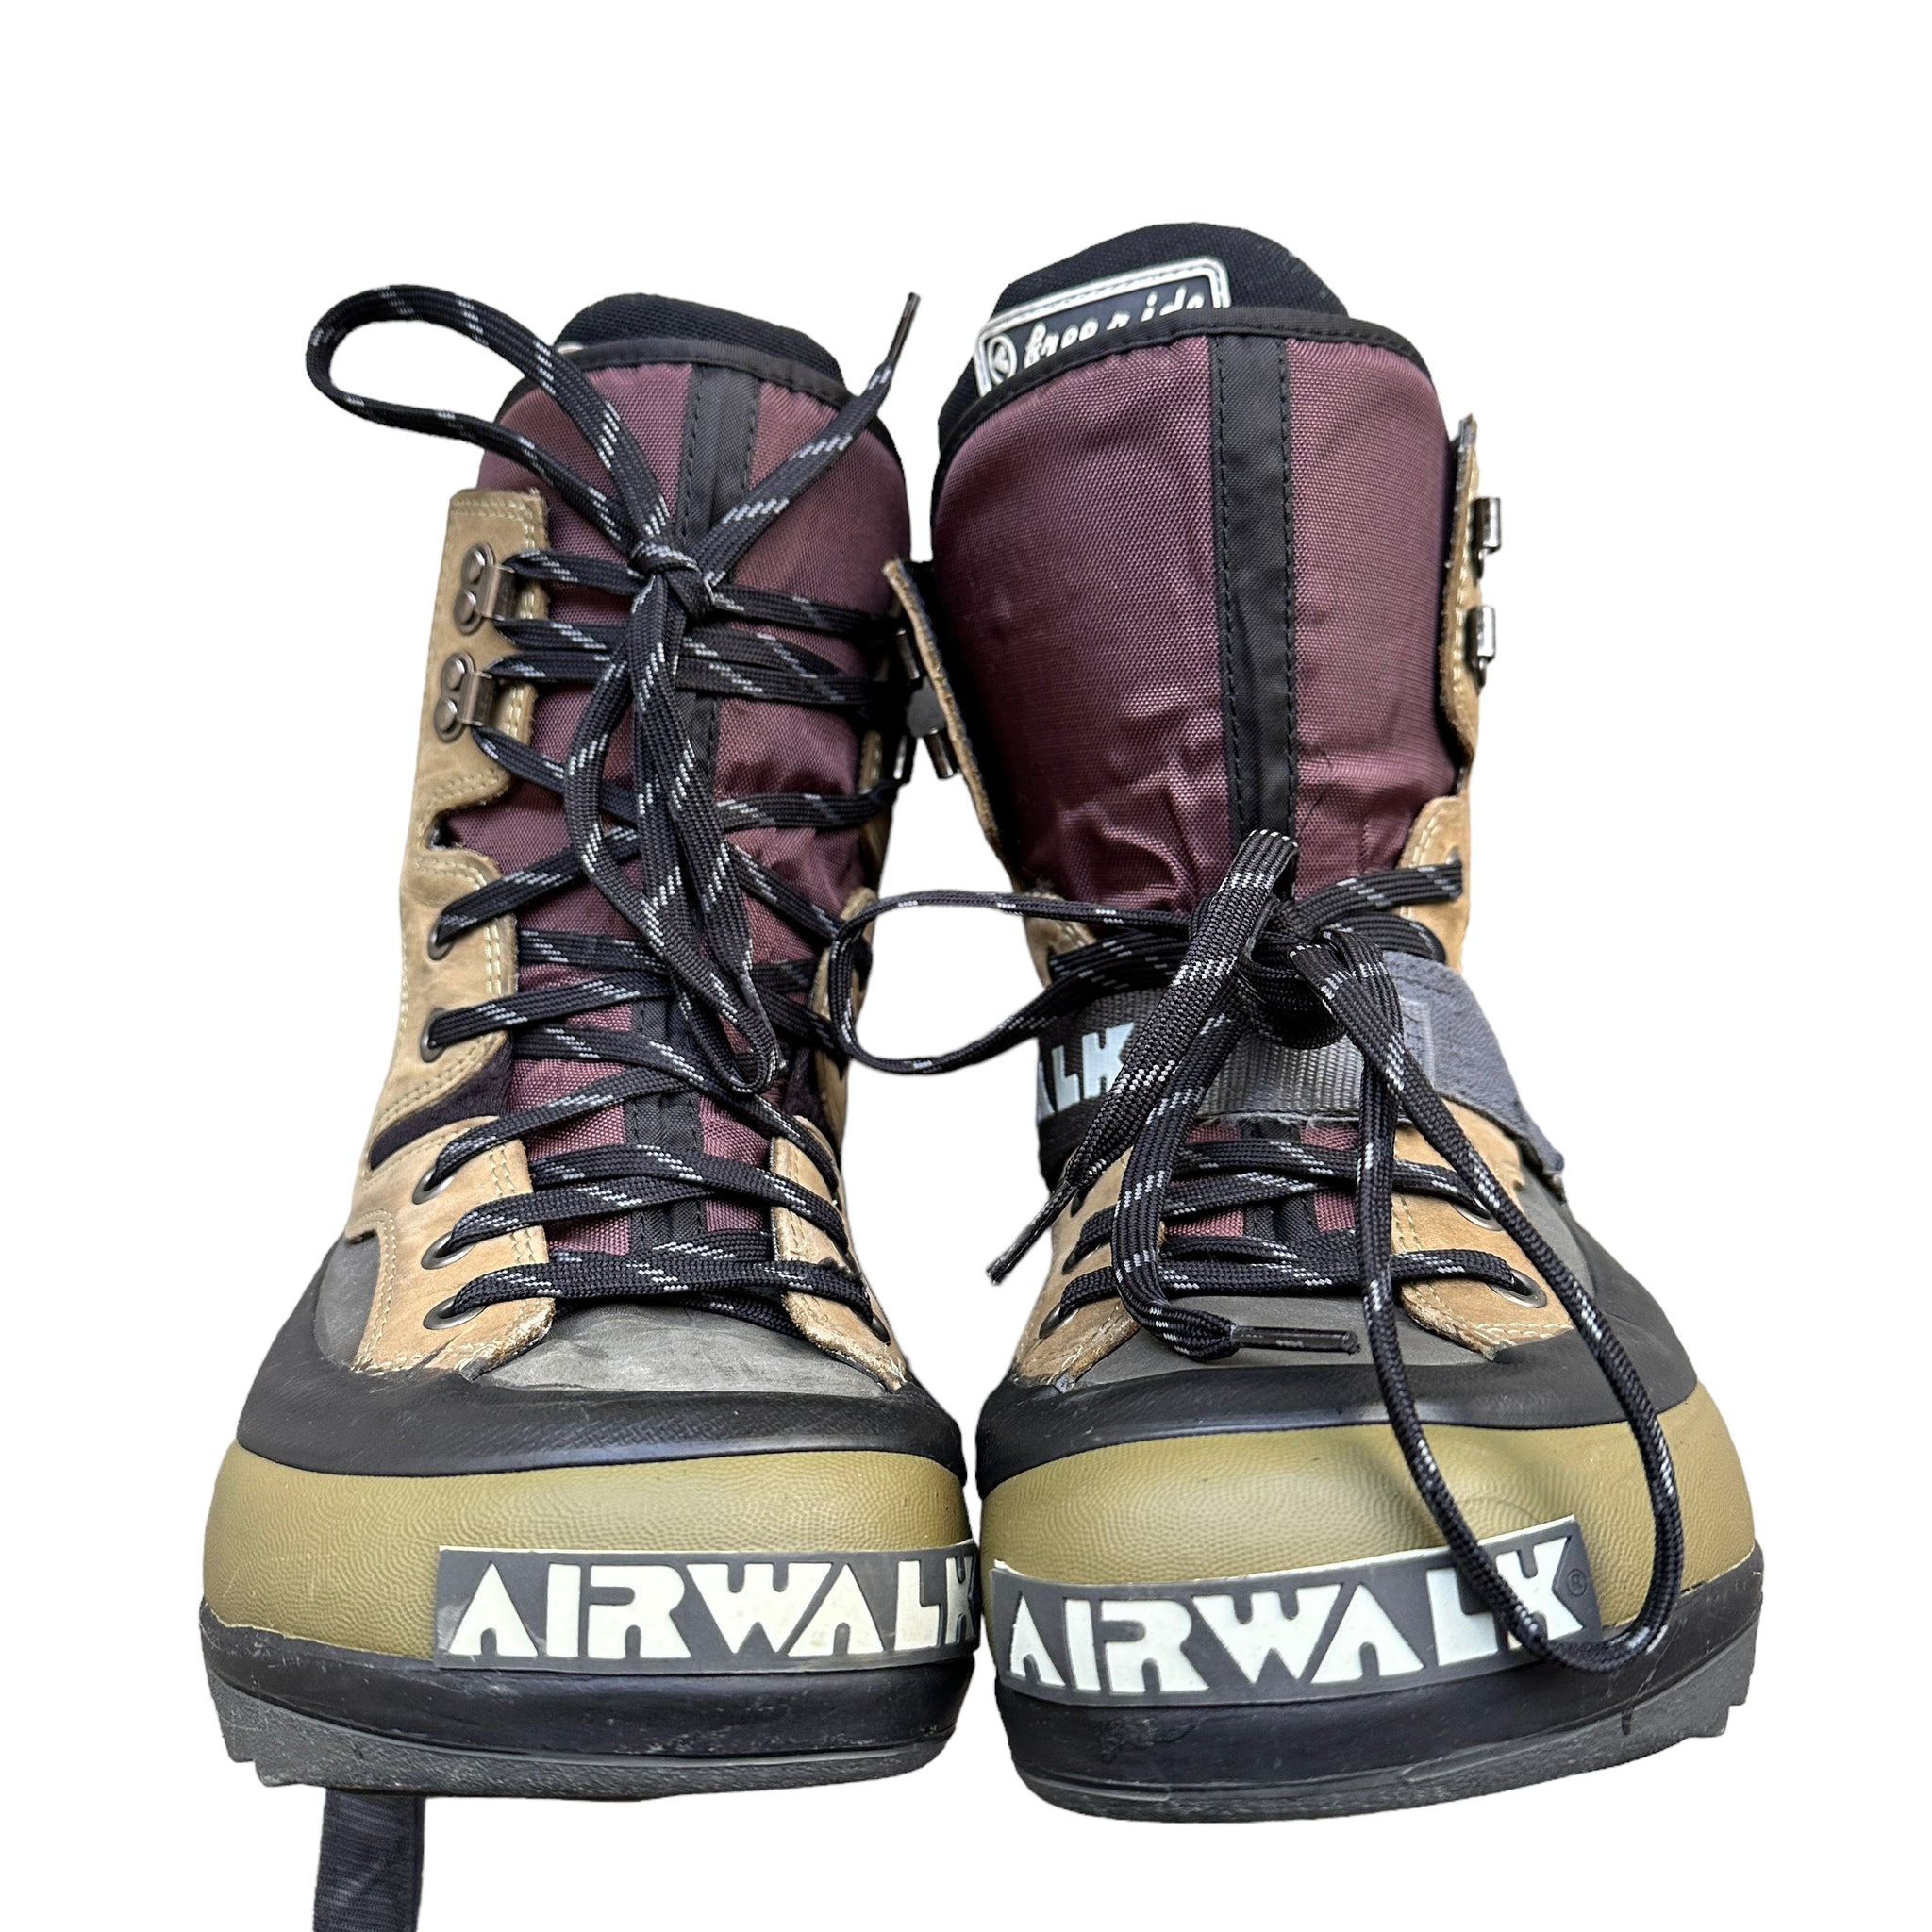 Deadstock 90s Airwalk “freeeide” snowboard boot.   -leather and rubber built to last   Sz8